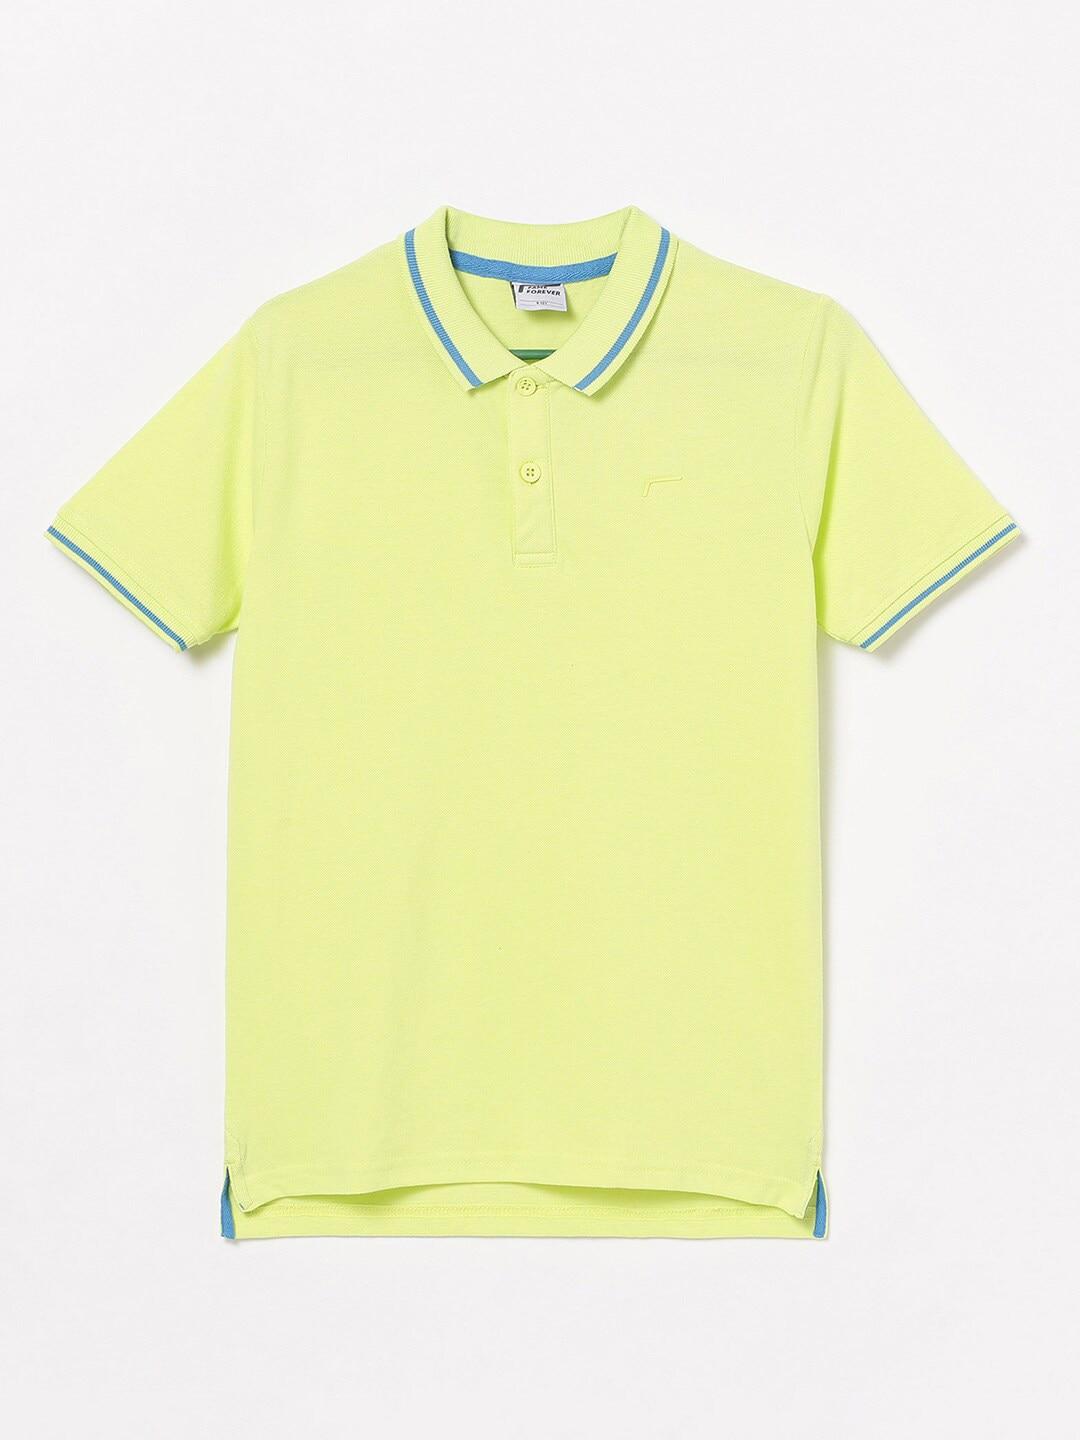 fame-forever-by-lifestyle-boys-lime-green-polo-collar-pure-cotton-t-shirt